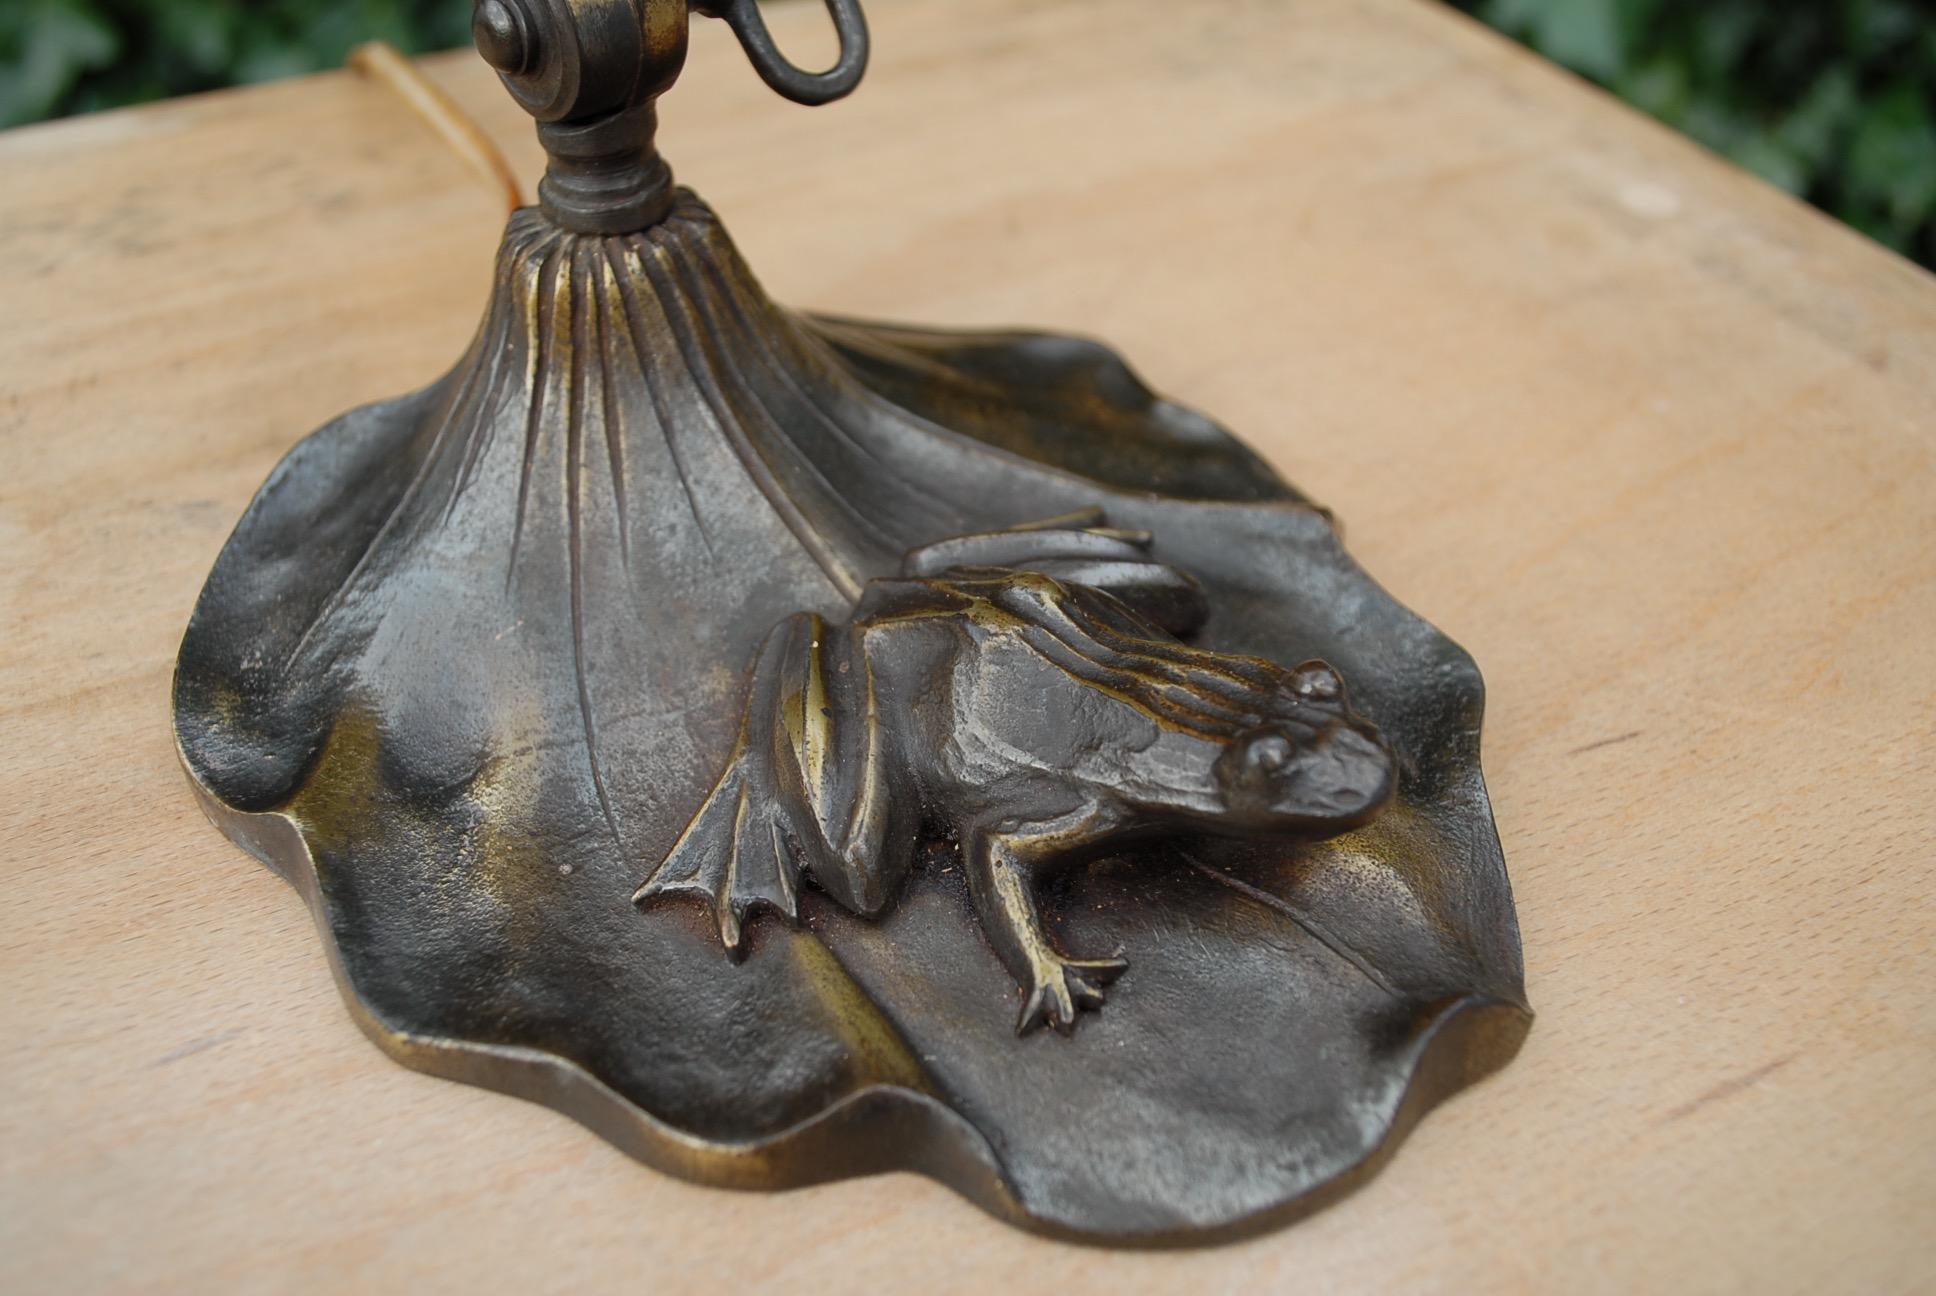 Highly Decorative & Artistic Table Desk Lamp w Bronze Frog Sculpture & Butterfly 2